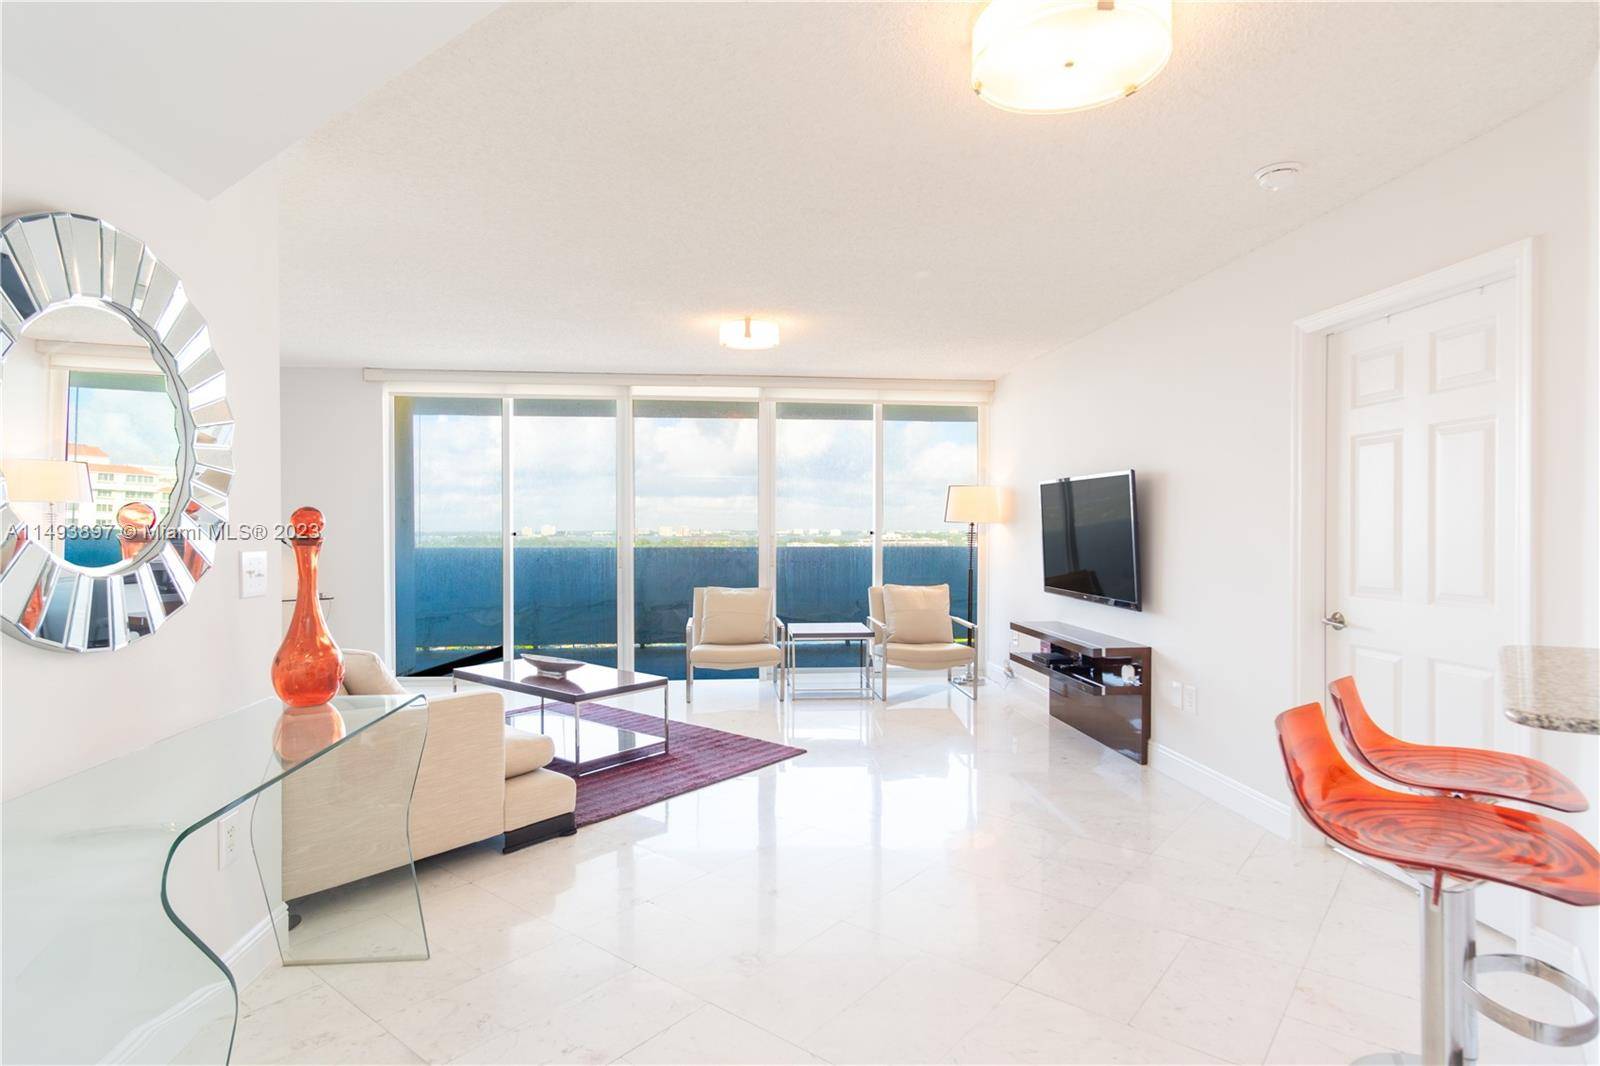 Beautifully appointed 2 bedroom furnished condo in North Beach with a beautiful intercoastal view.